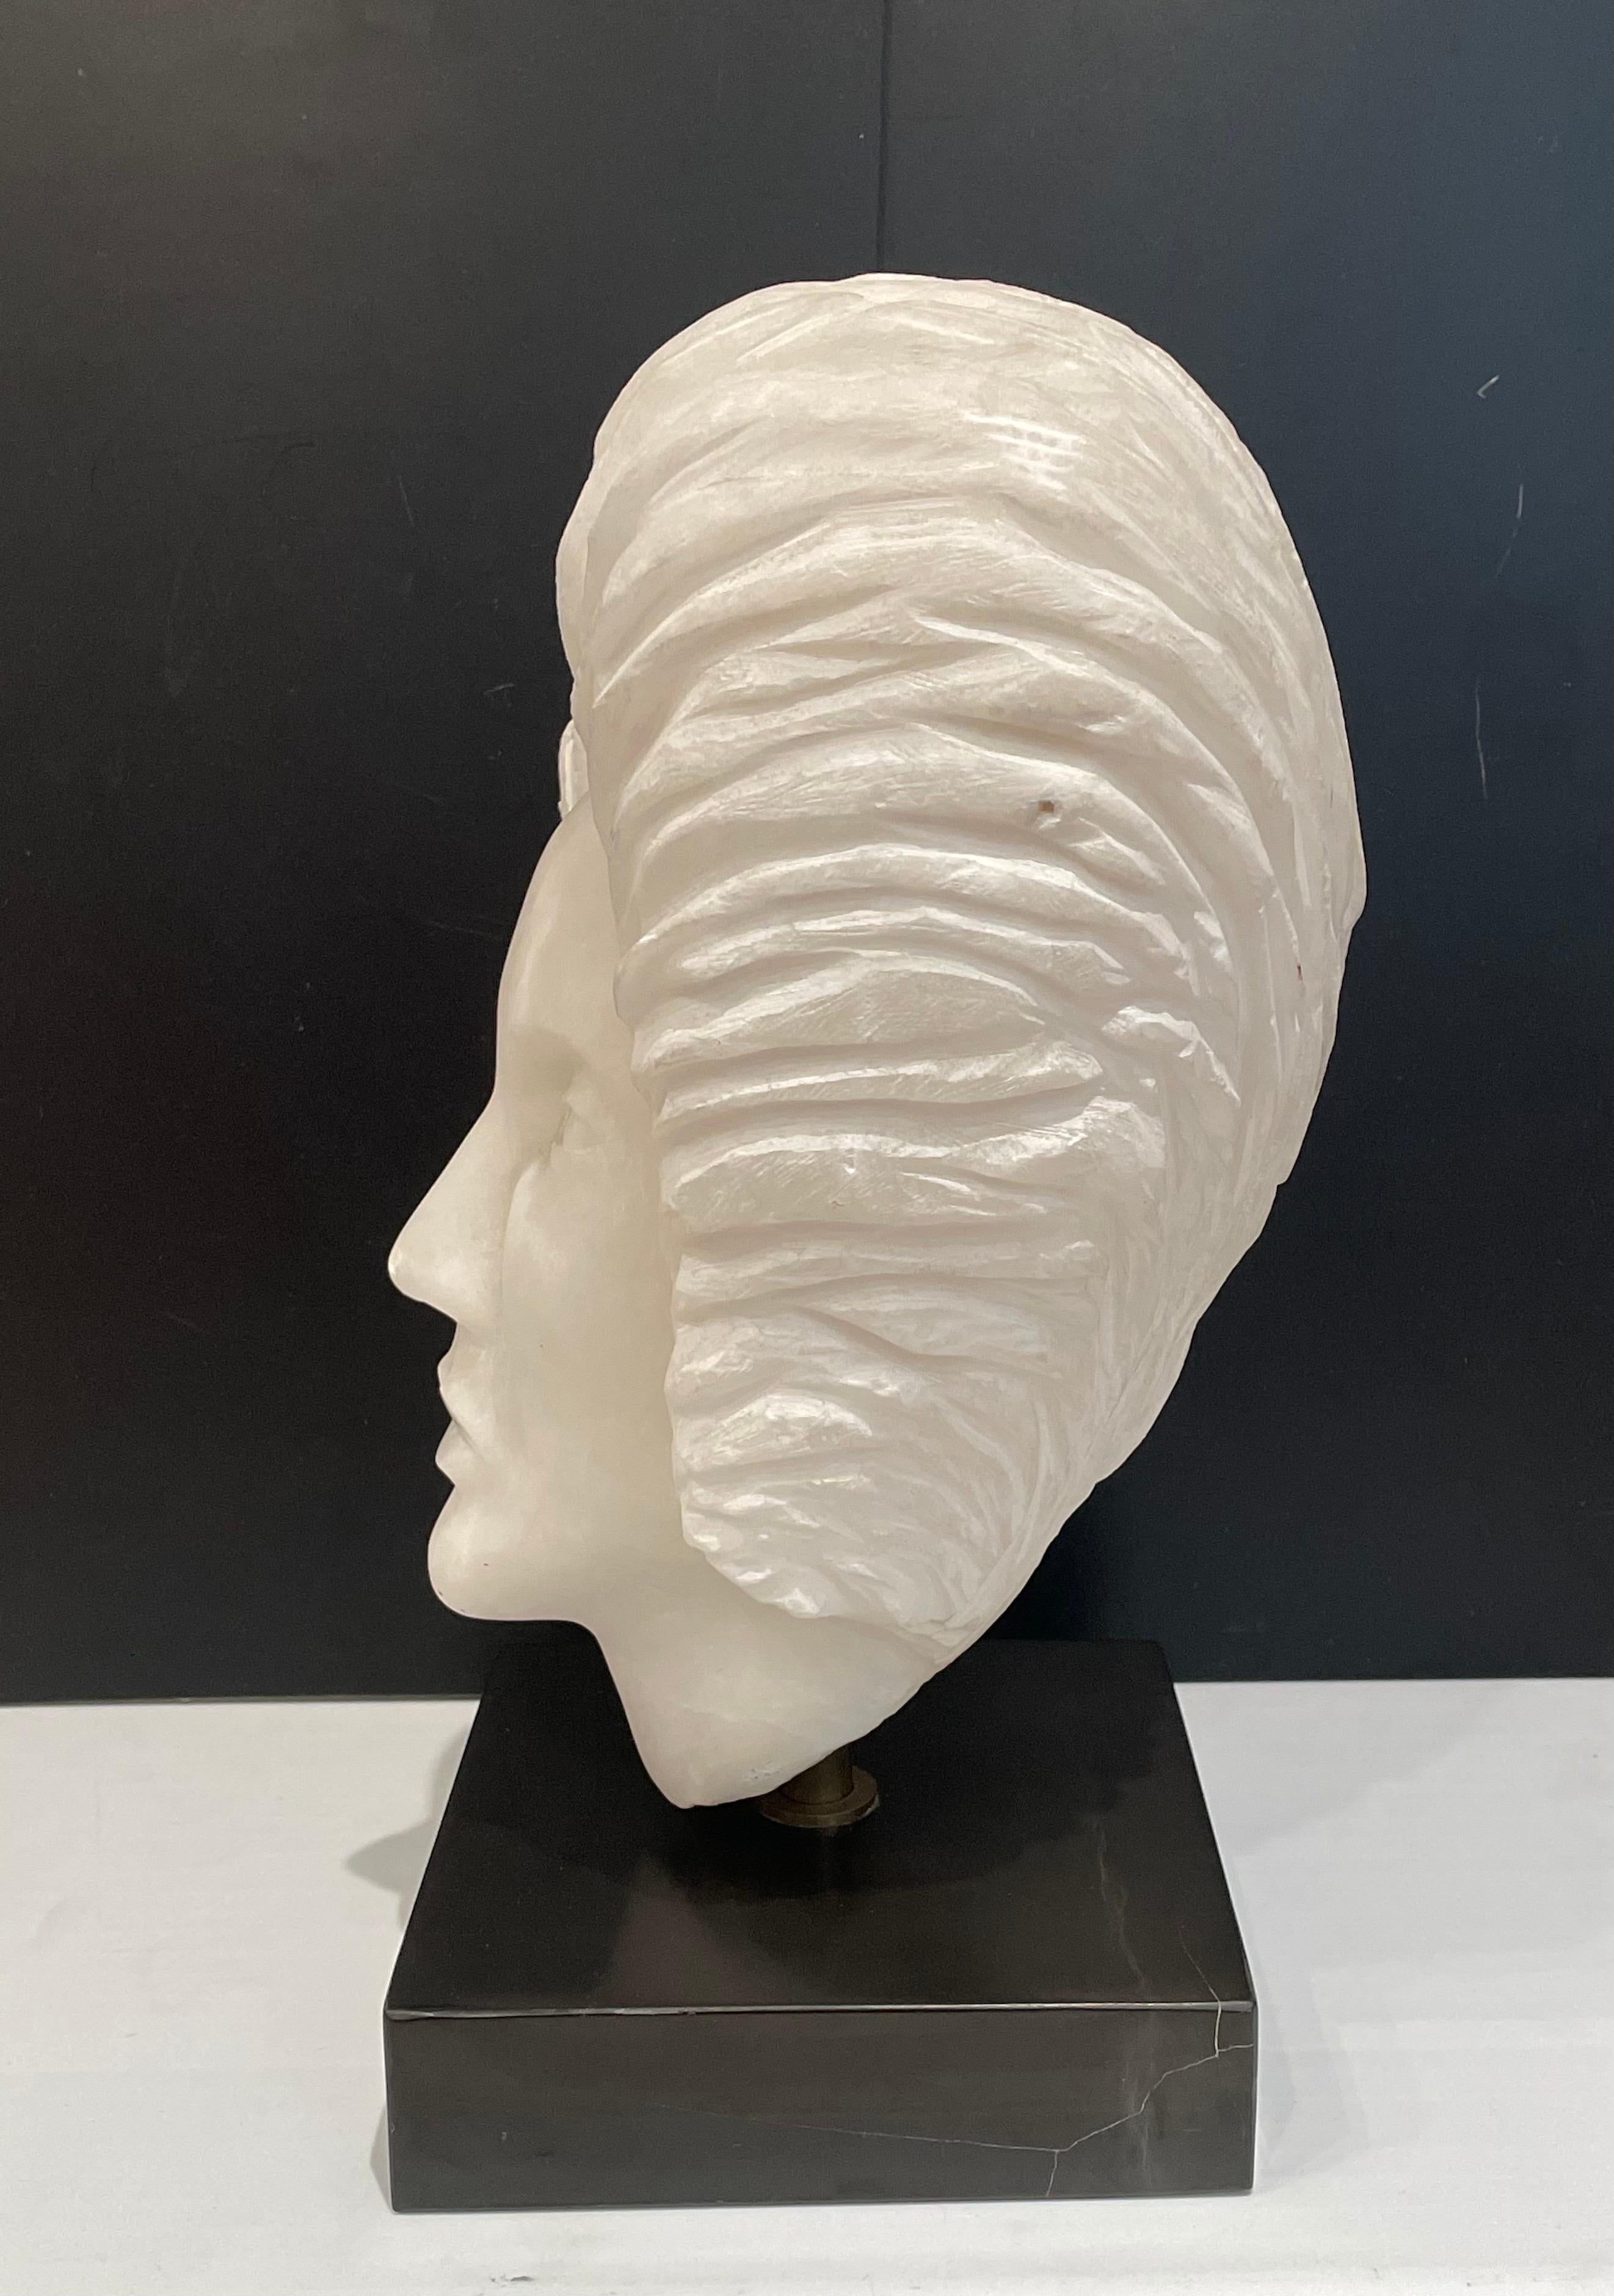 Art Deco Alabaster Woman's Head Sculpture on Marble Base Rotates 360 Degree